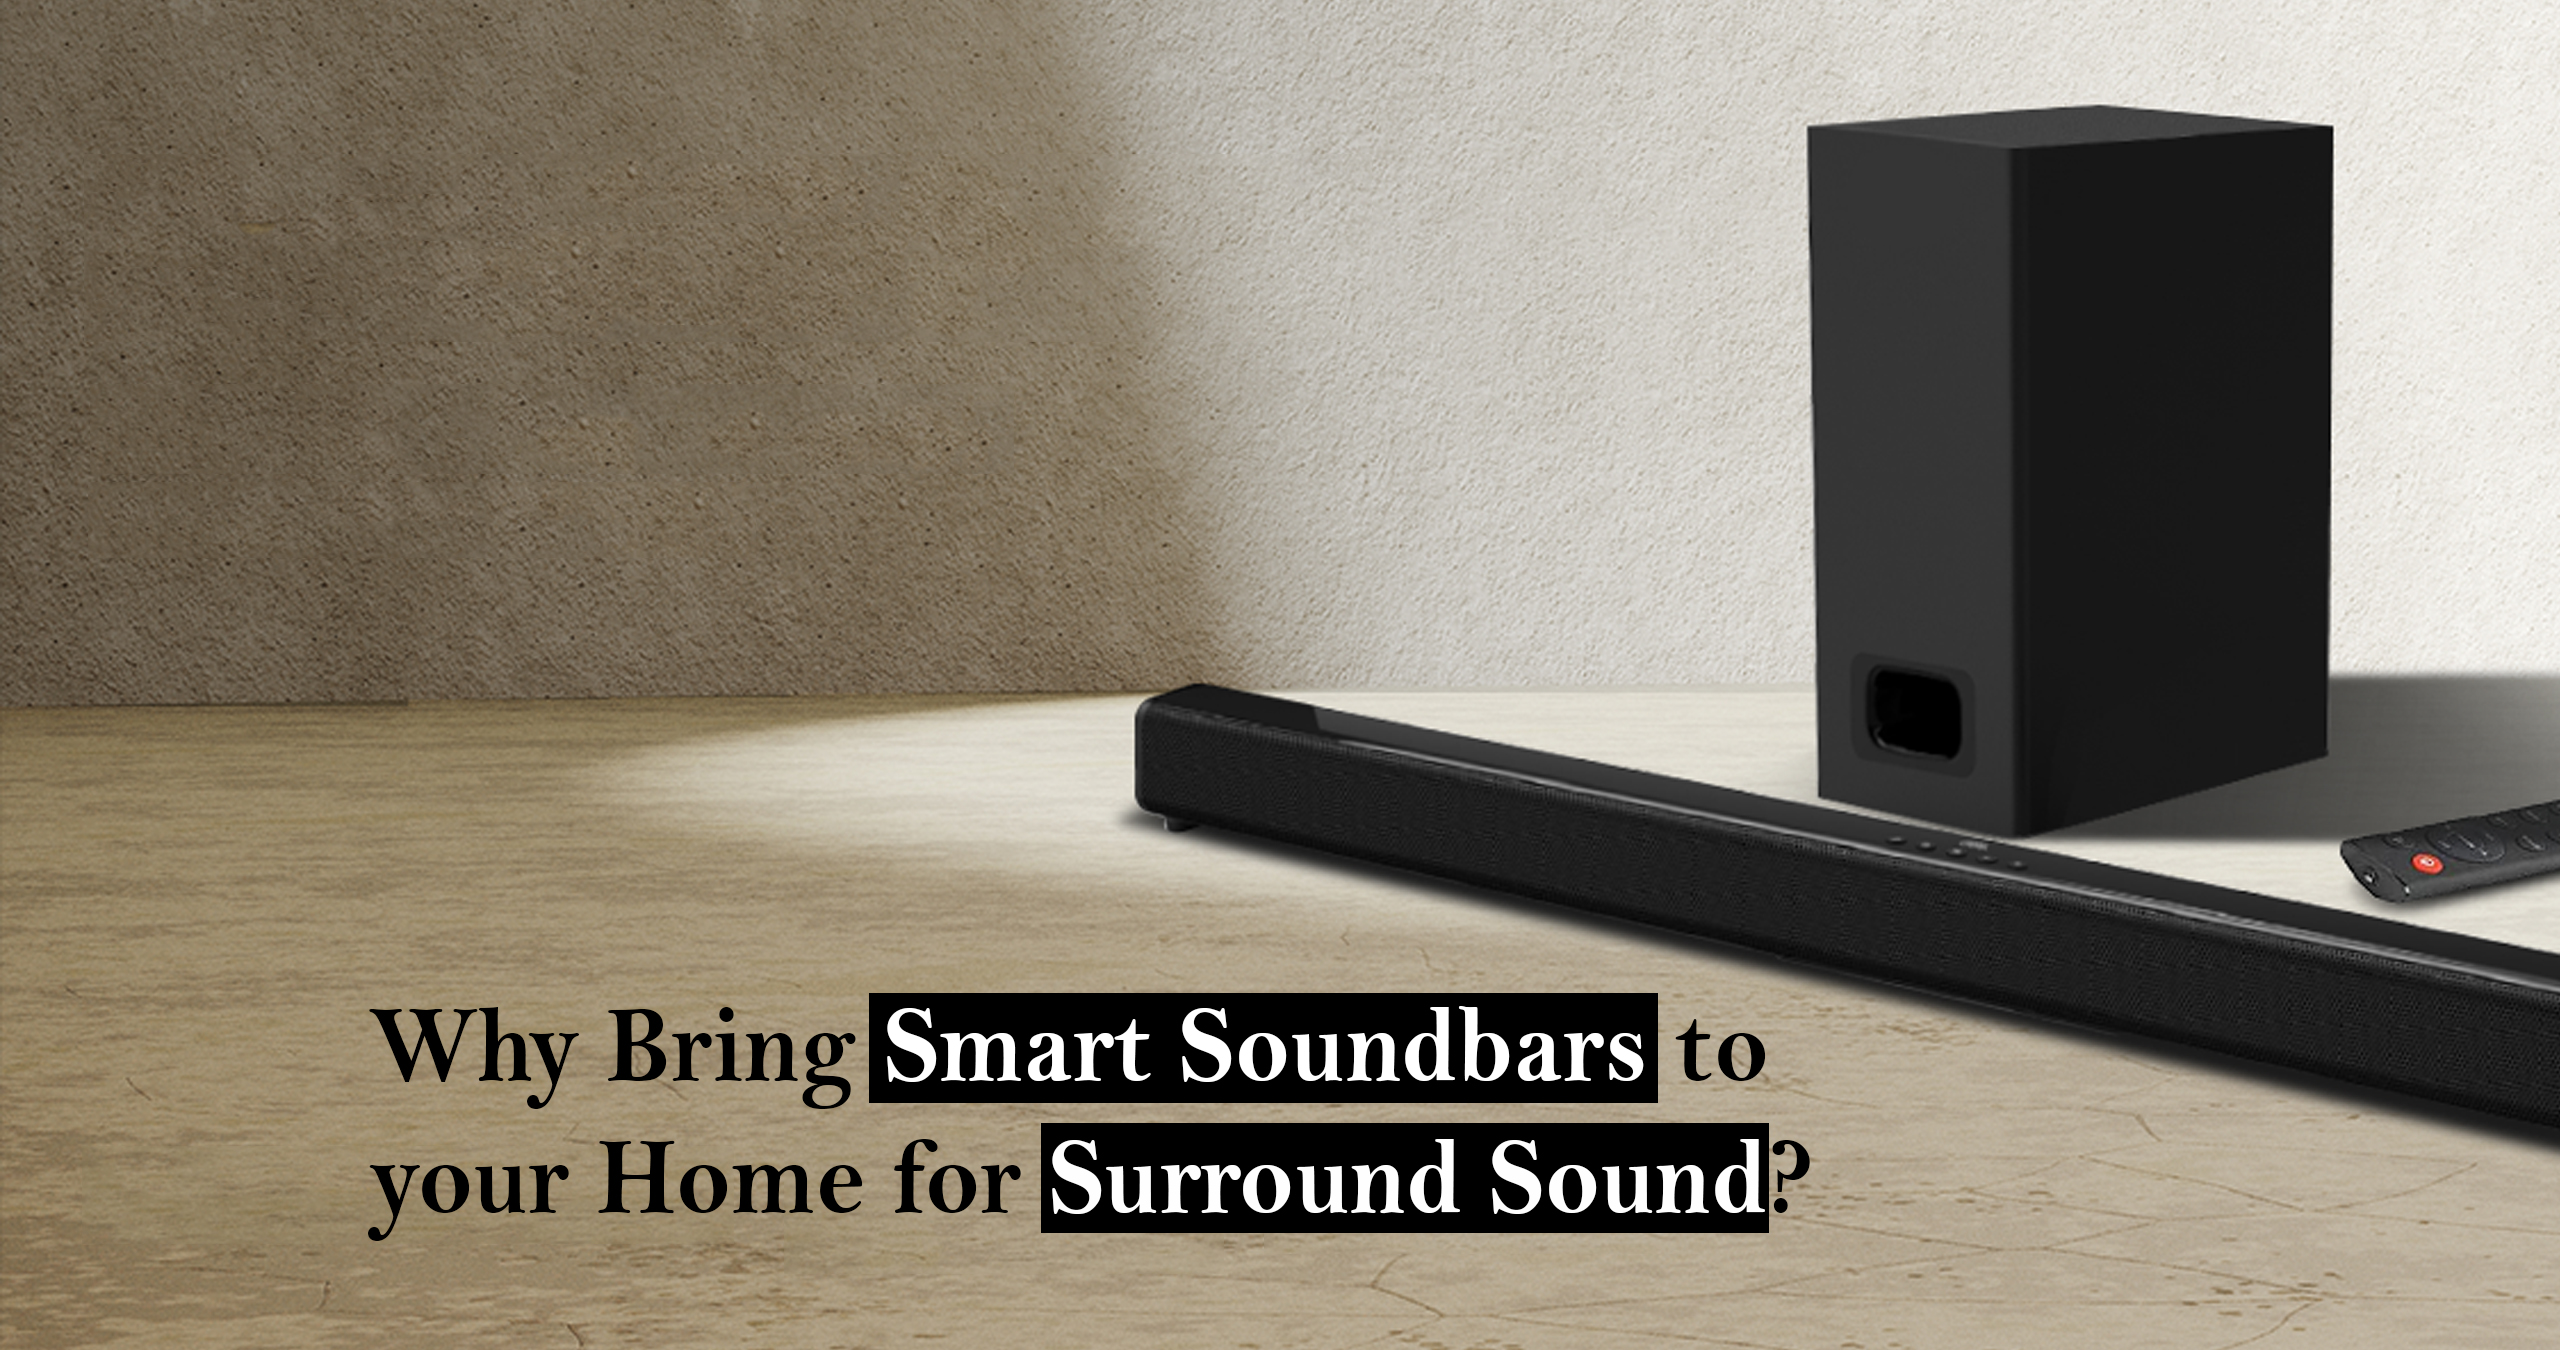 Why bring smart soundbars to your home for surround sound?